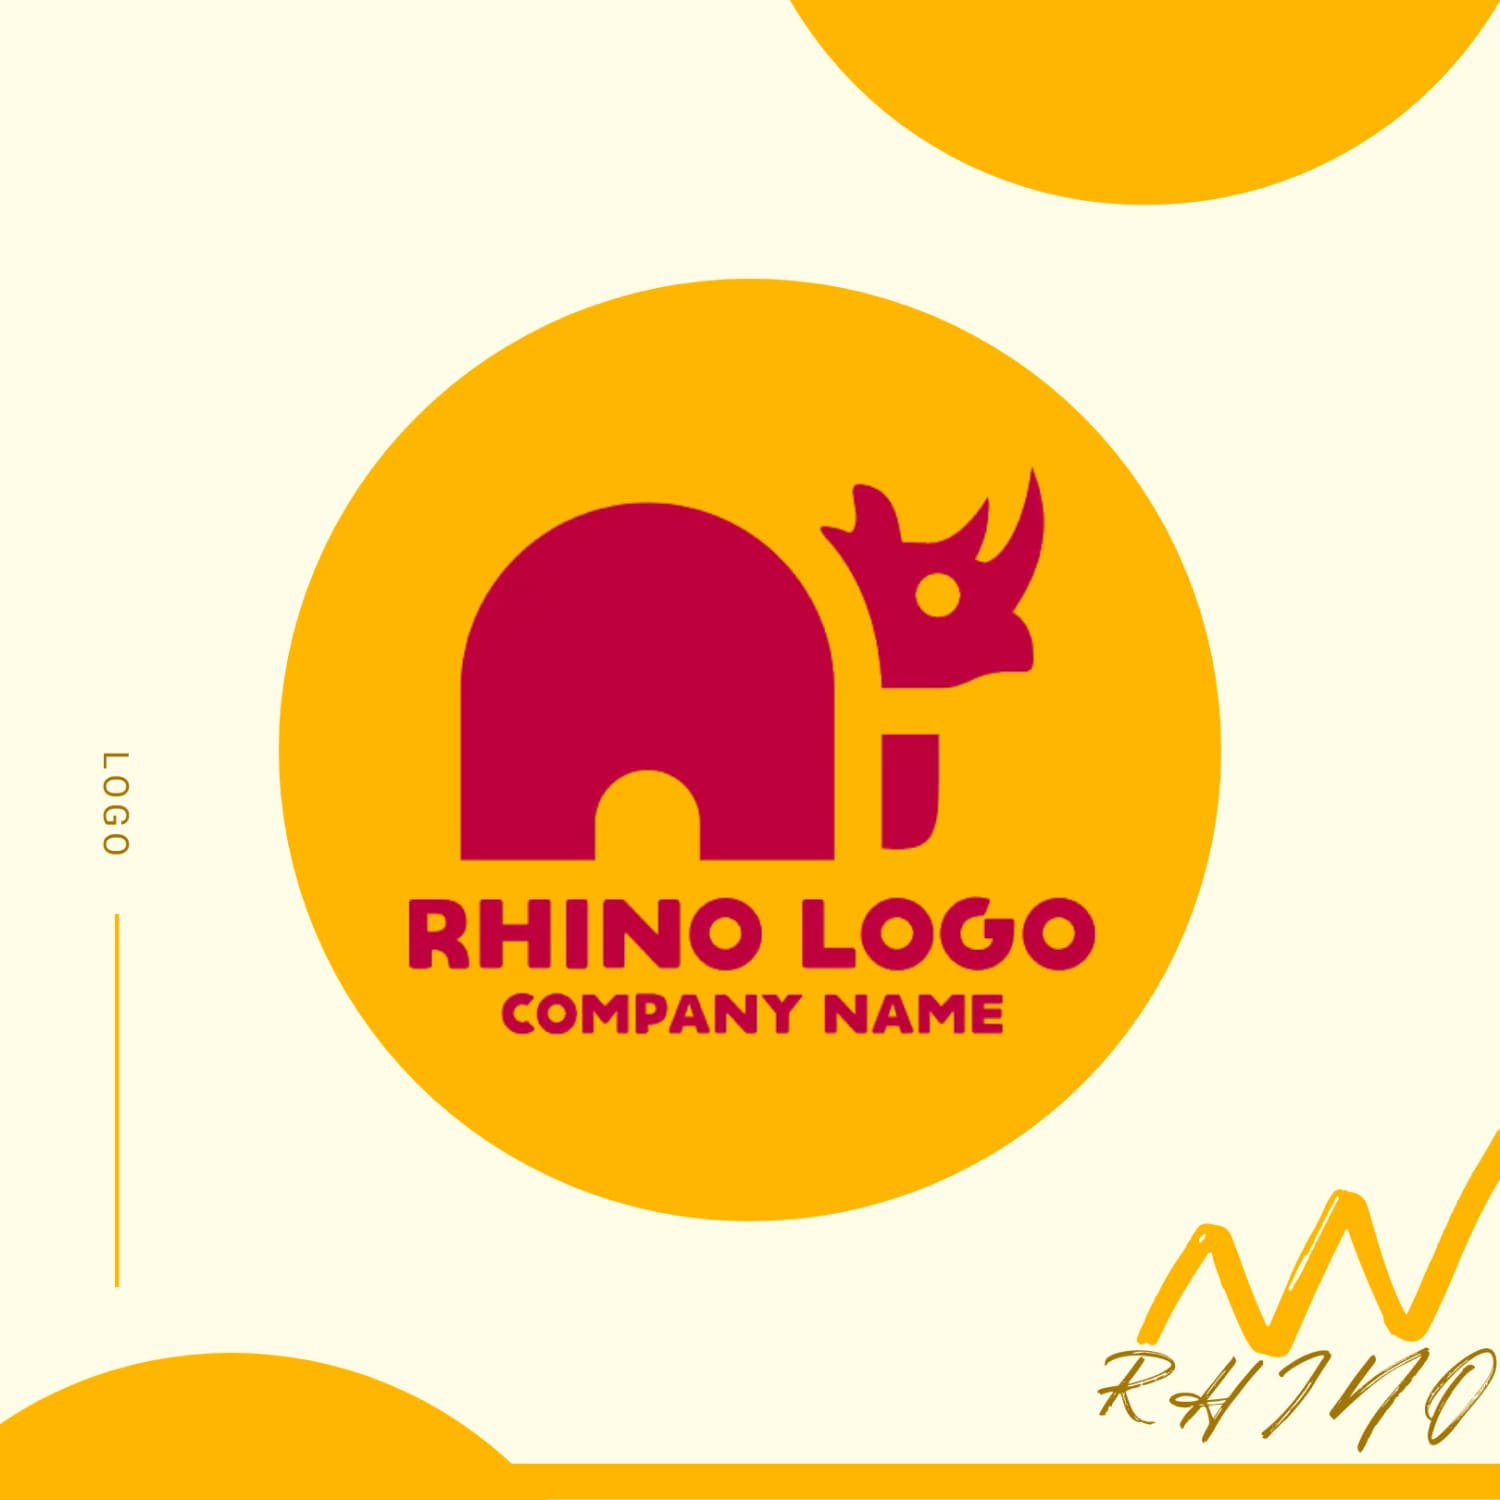 Amazing rhino logo image in red color.